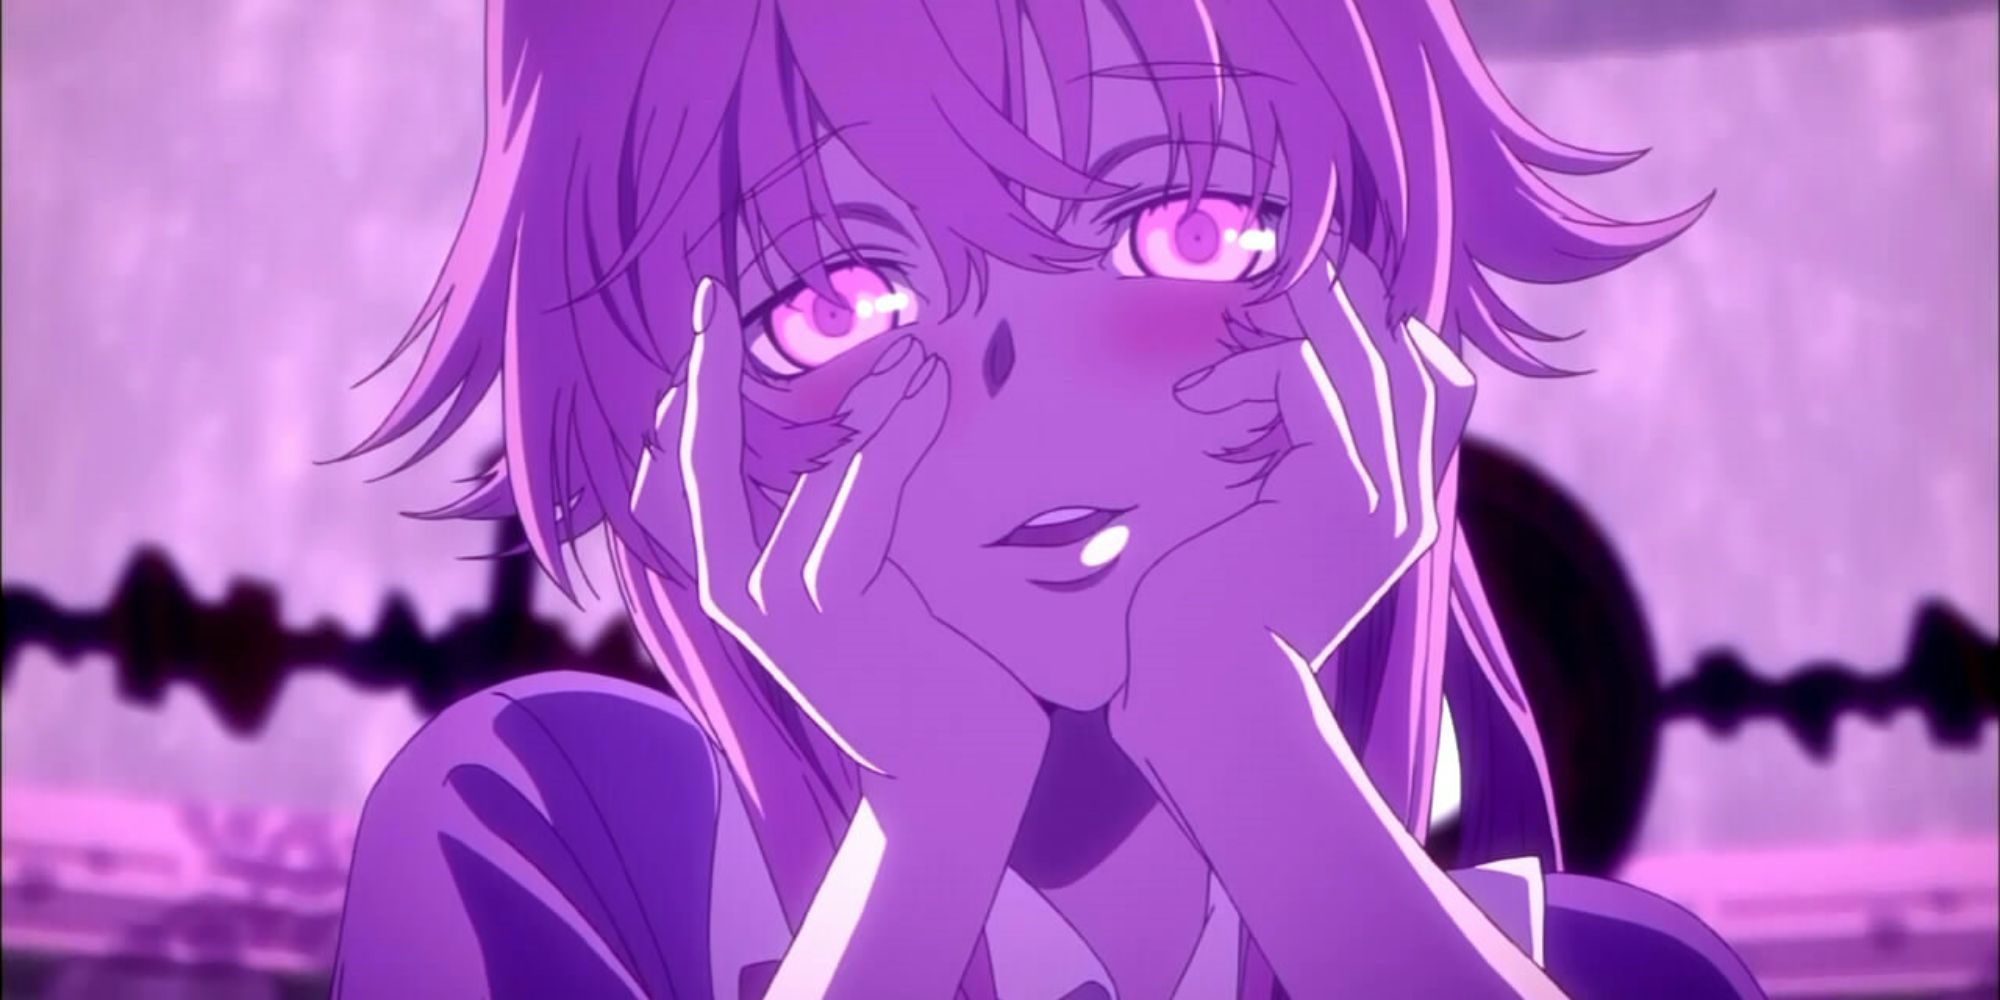 Future Diary character holding face in hands